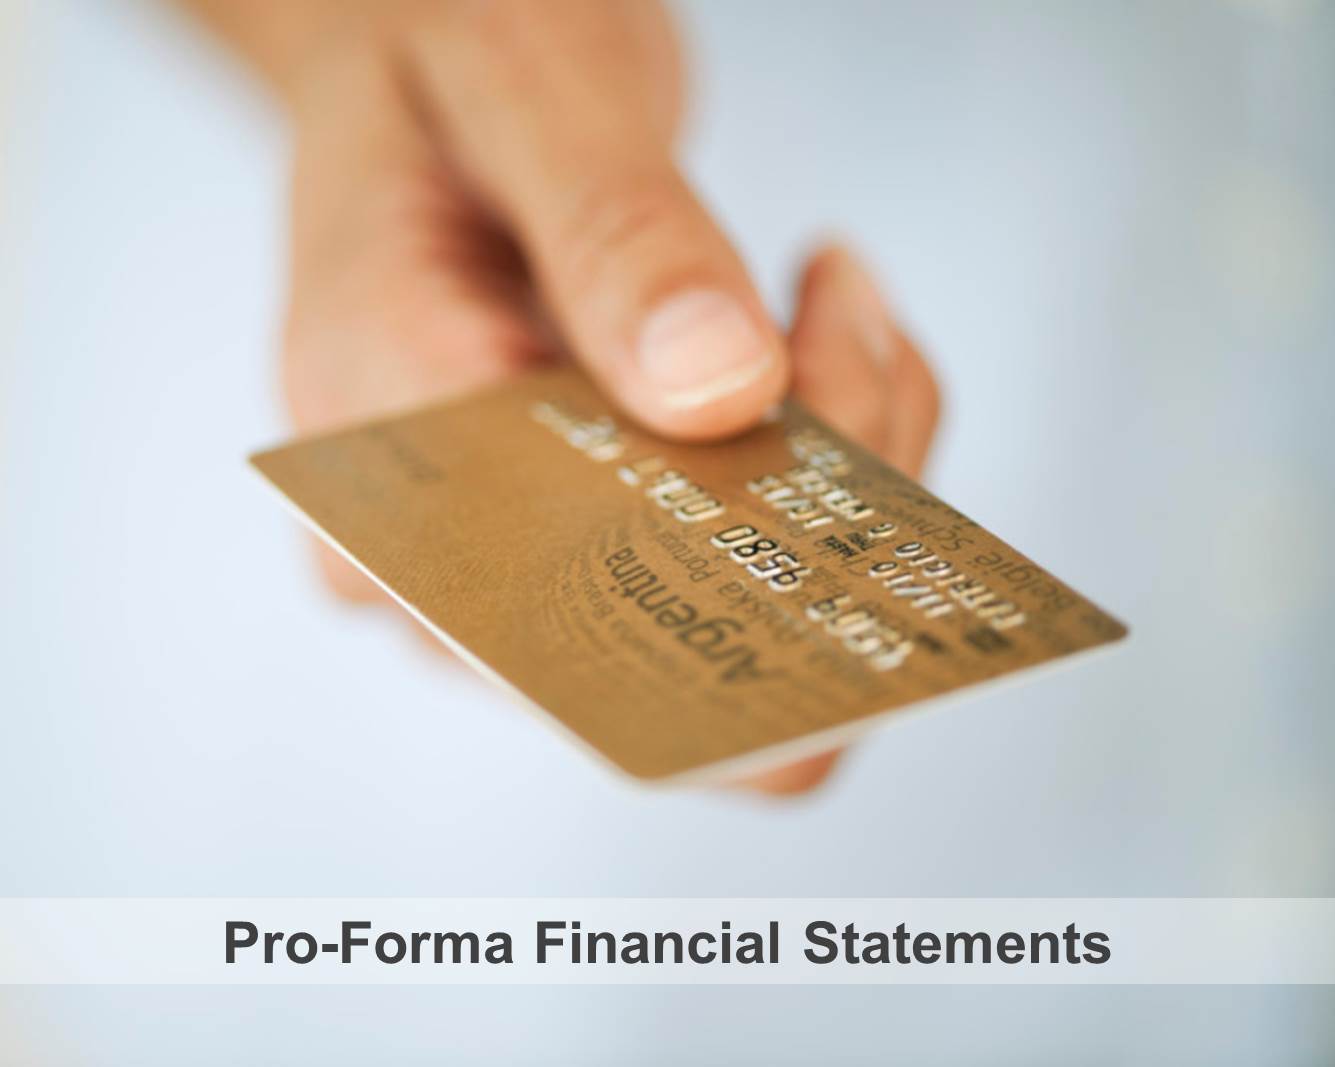 Pro-Forma Financial Statements